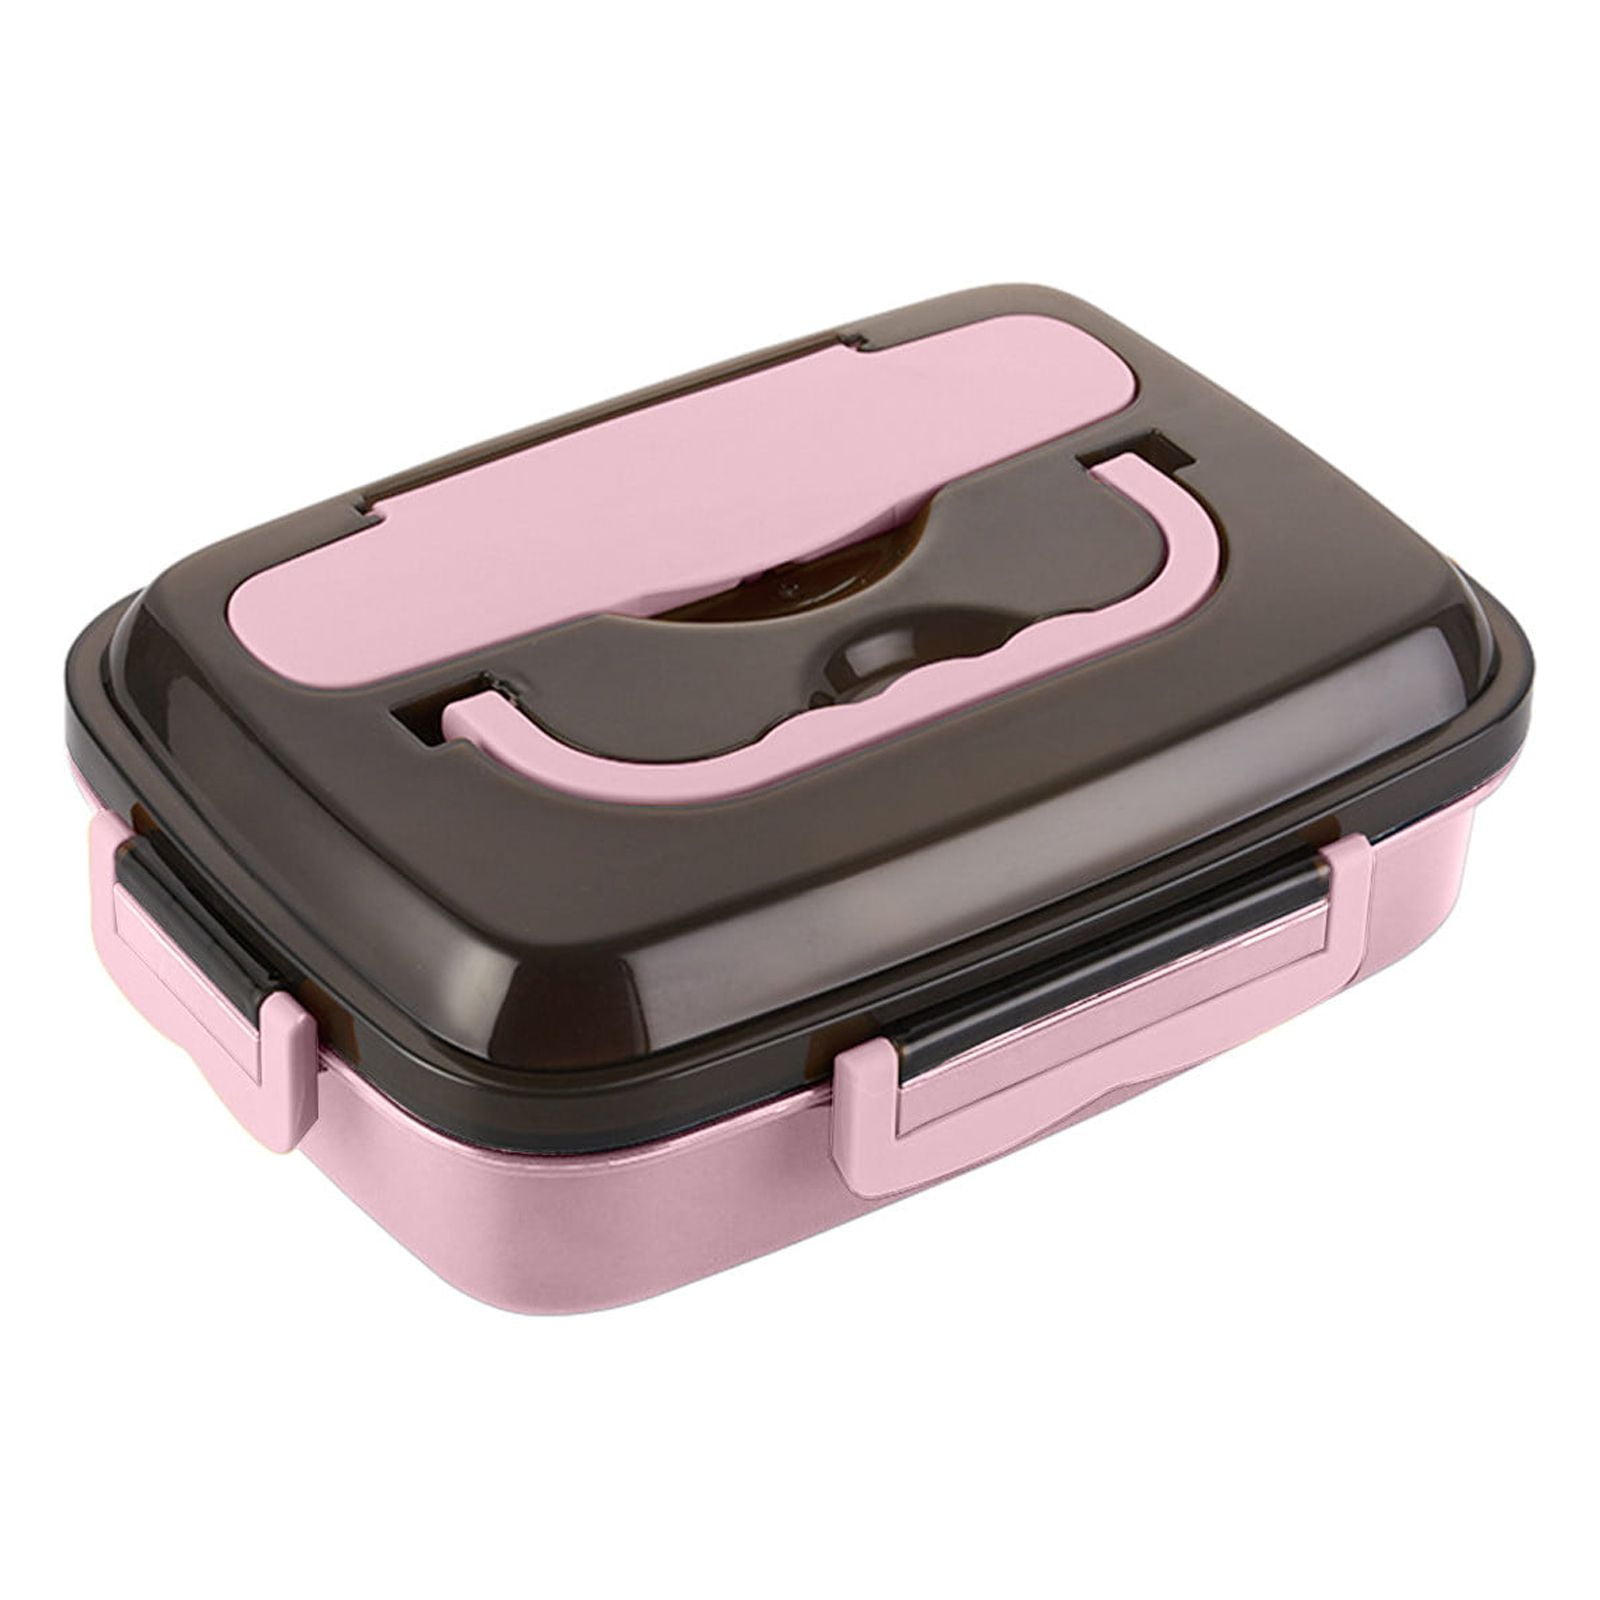  ZMYGOLON Bento Lunch Box for Kids, Lunch Bento Box Container  Leak-proof for Kids Adults Teens School, Upgrade Lunch Containers pink set:  Home & Kitchen